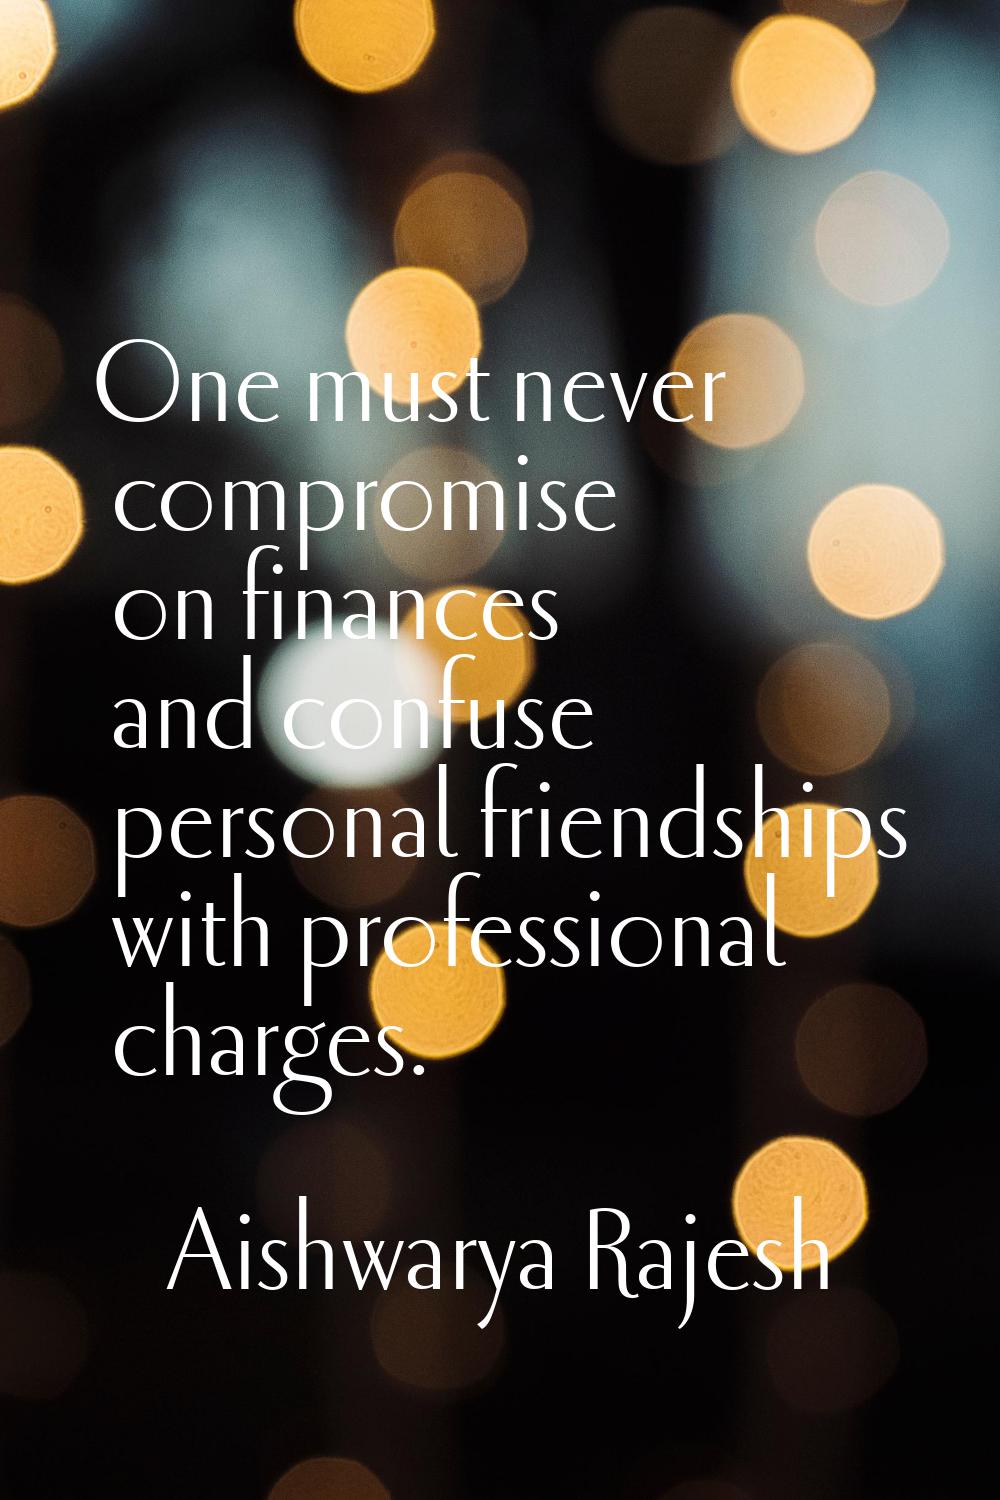 One must never compromise on finances and confuse personal friendships with professional charges.